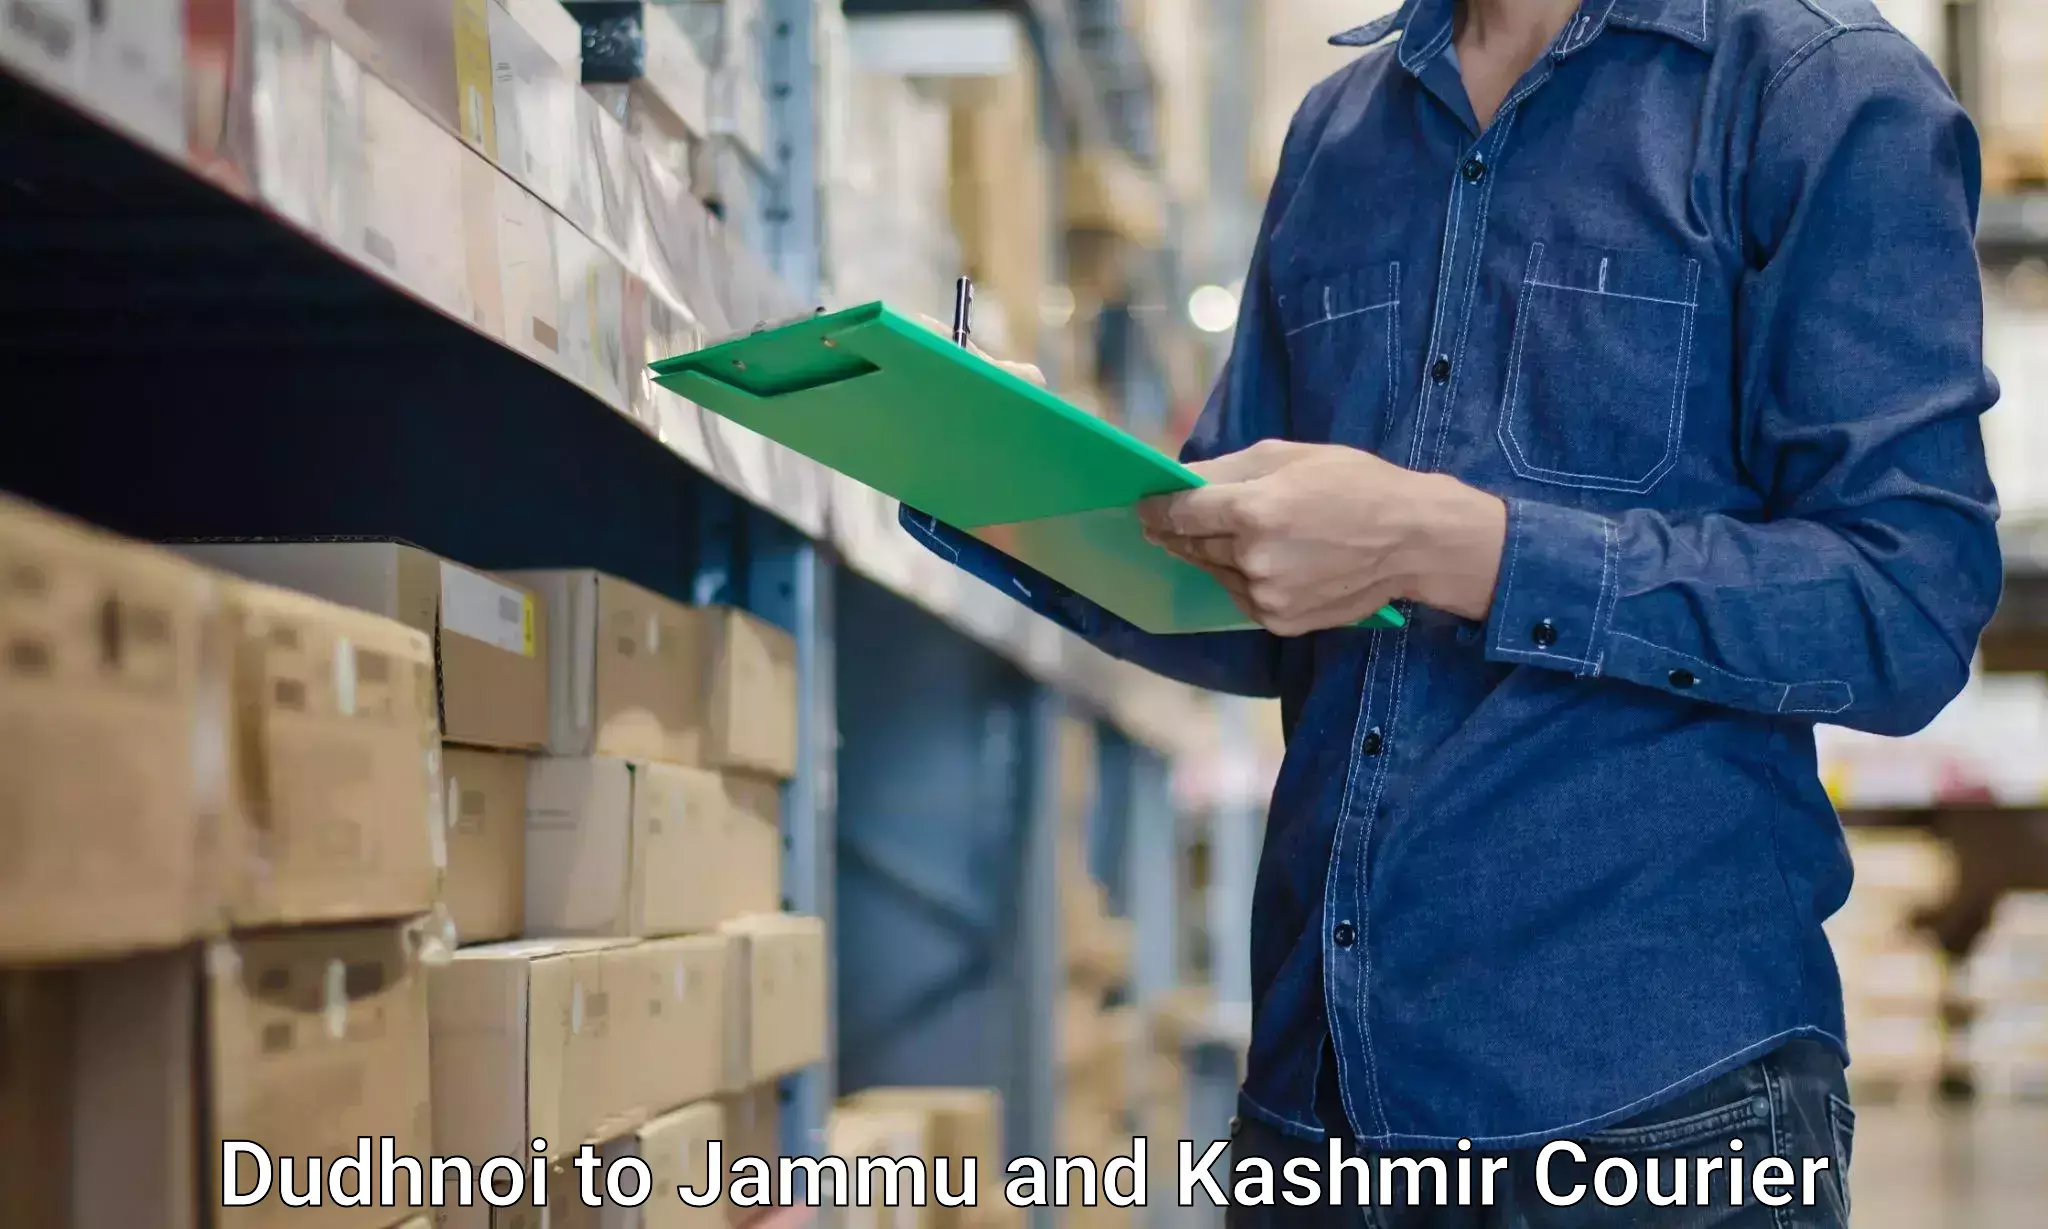 Furniture moving and handling Dudhnoi to Jammu and Kashmir